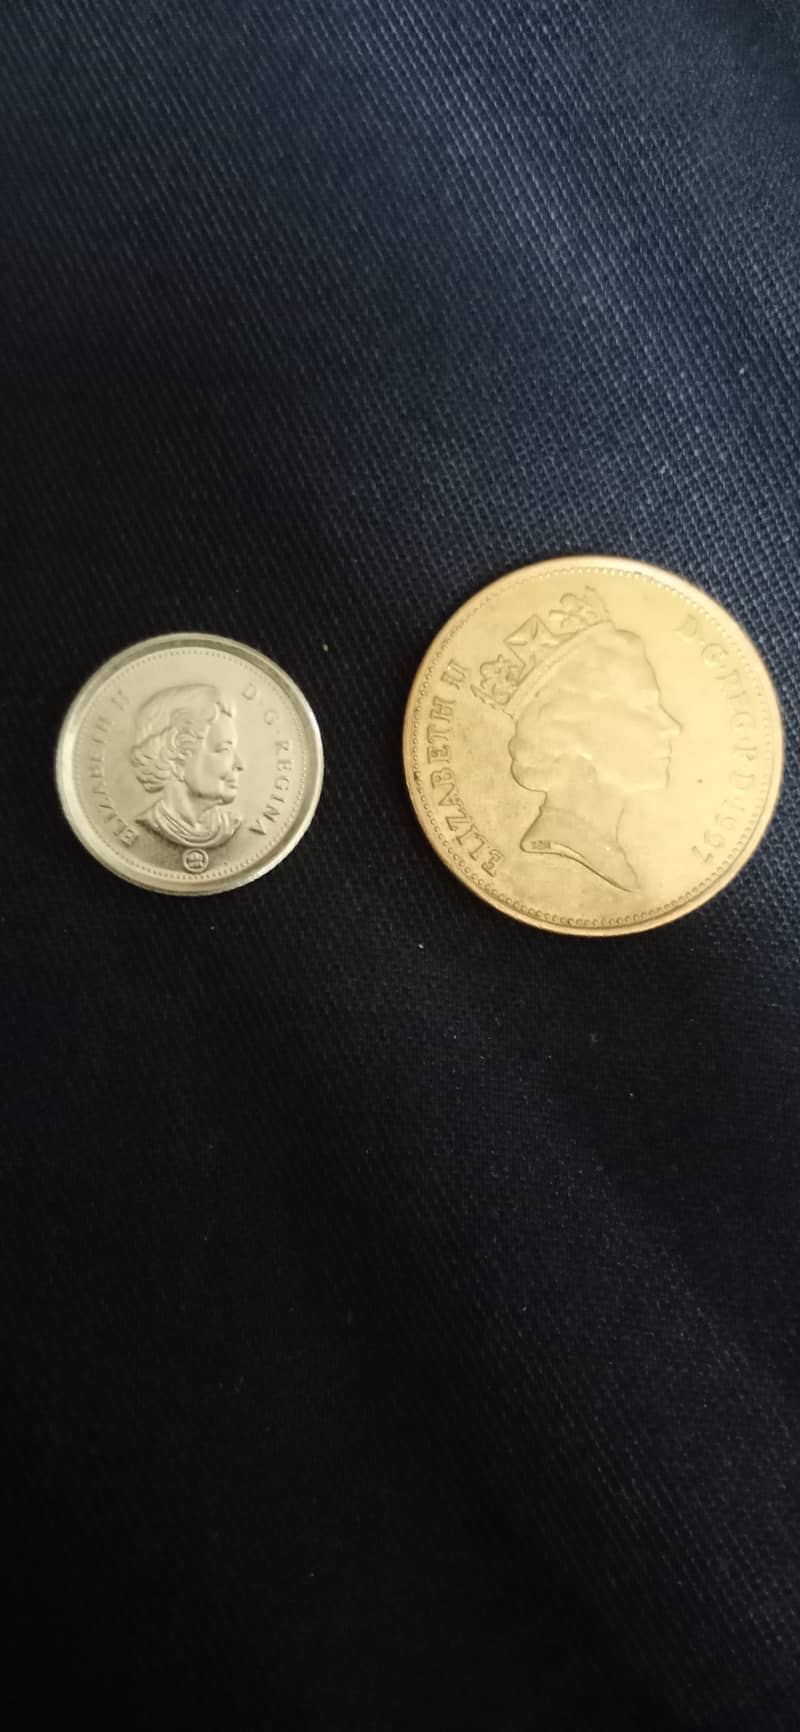 2 pence + Canadian Cents 0